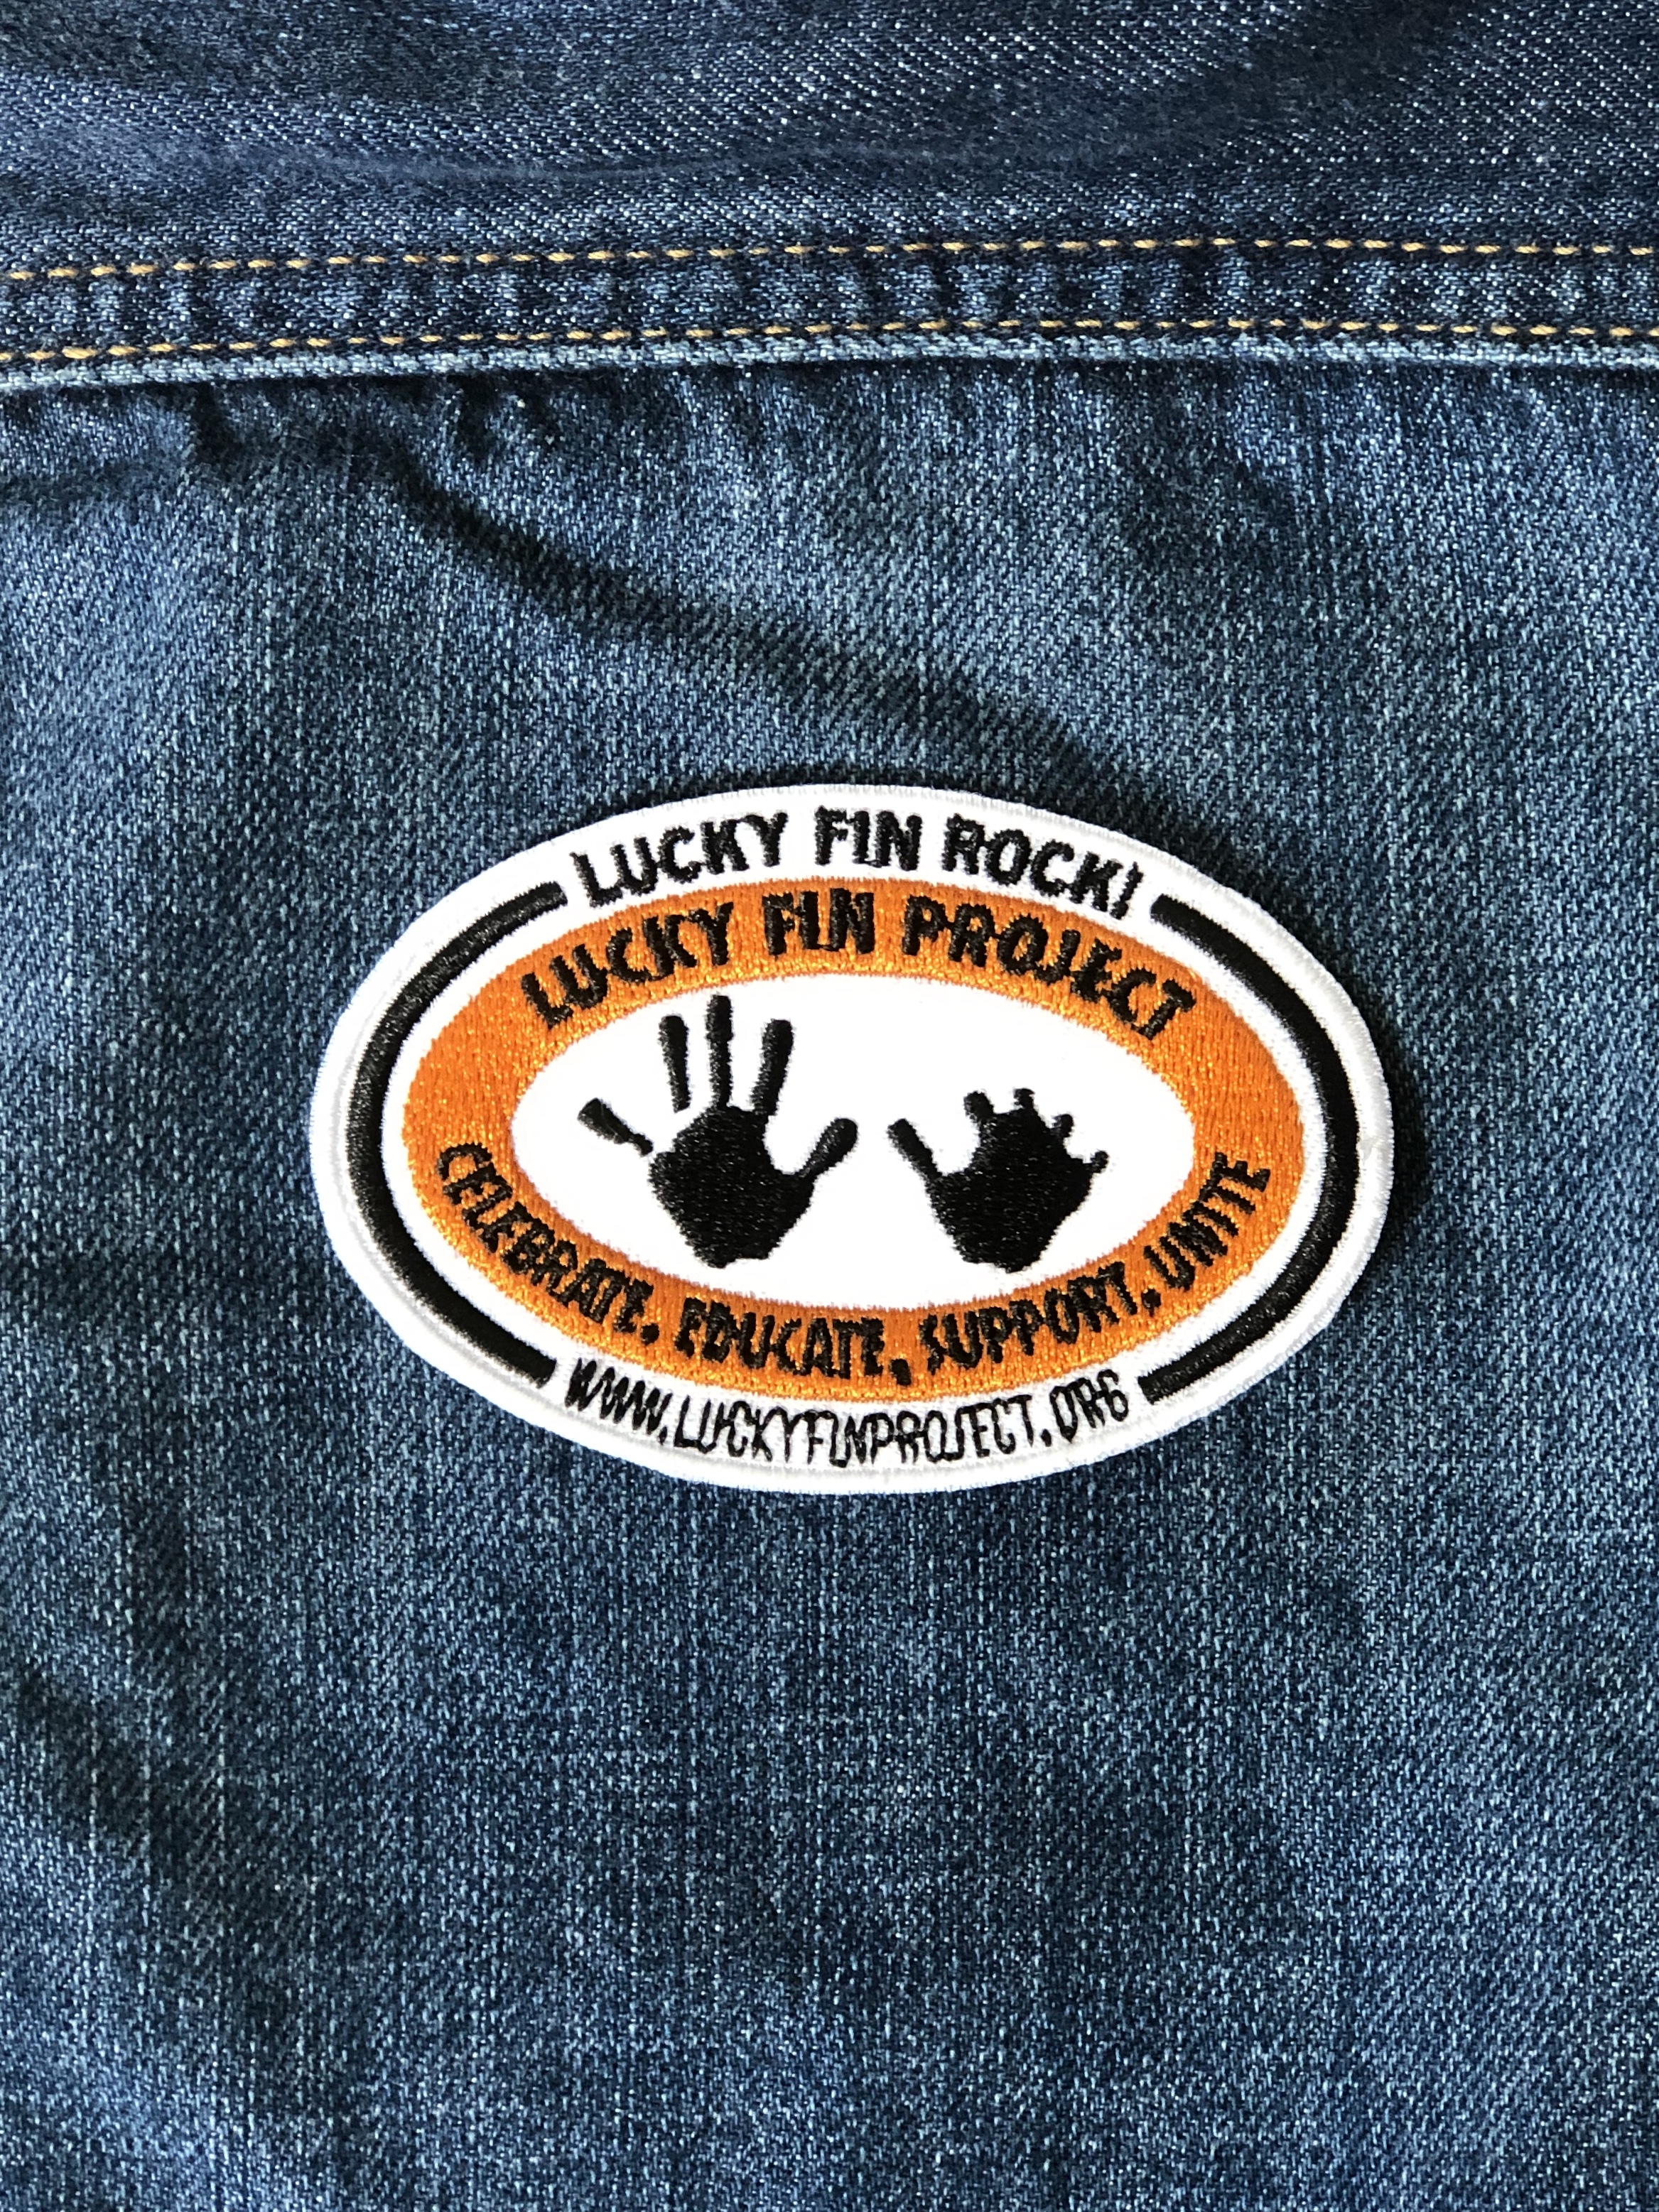 Embroidered Logo Patch LFP-PCH